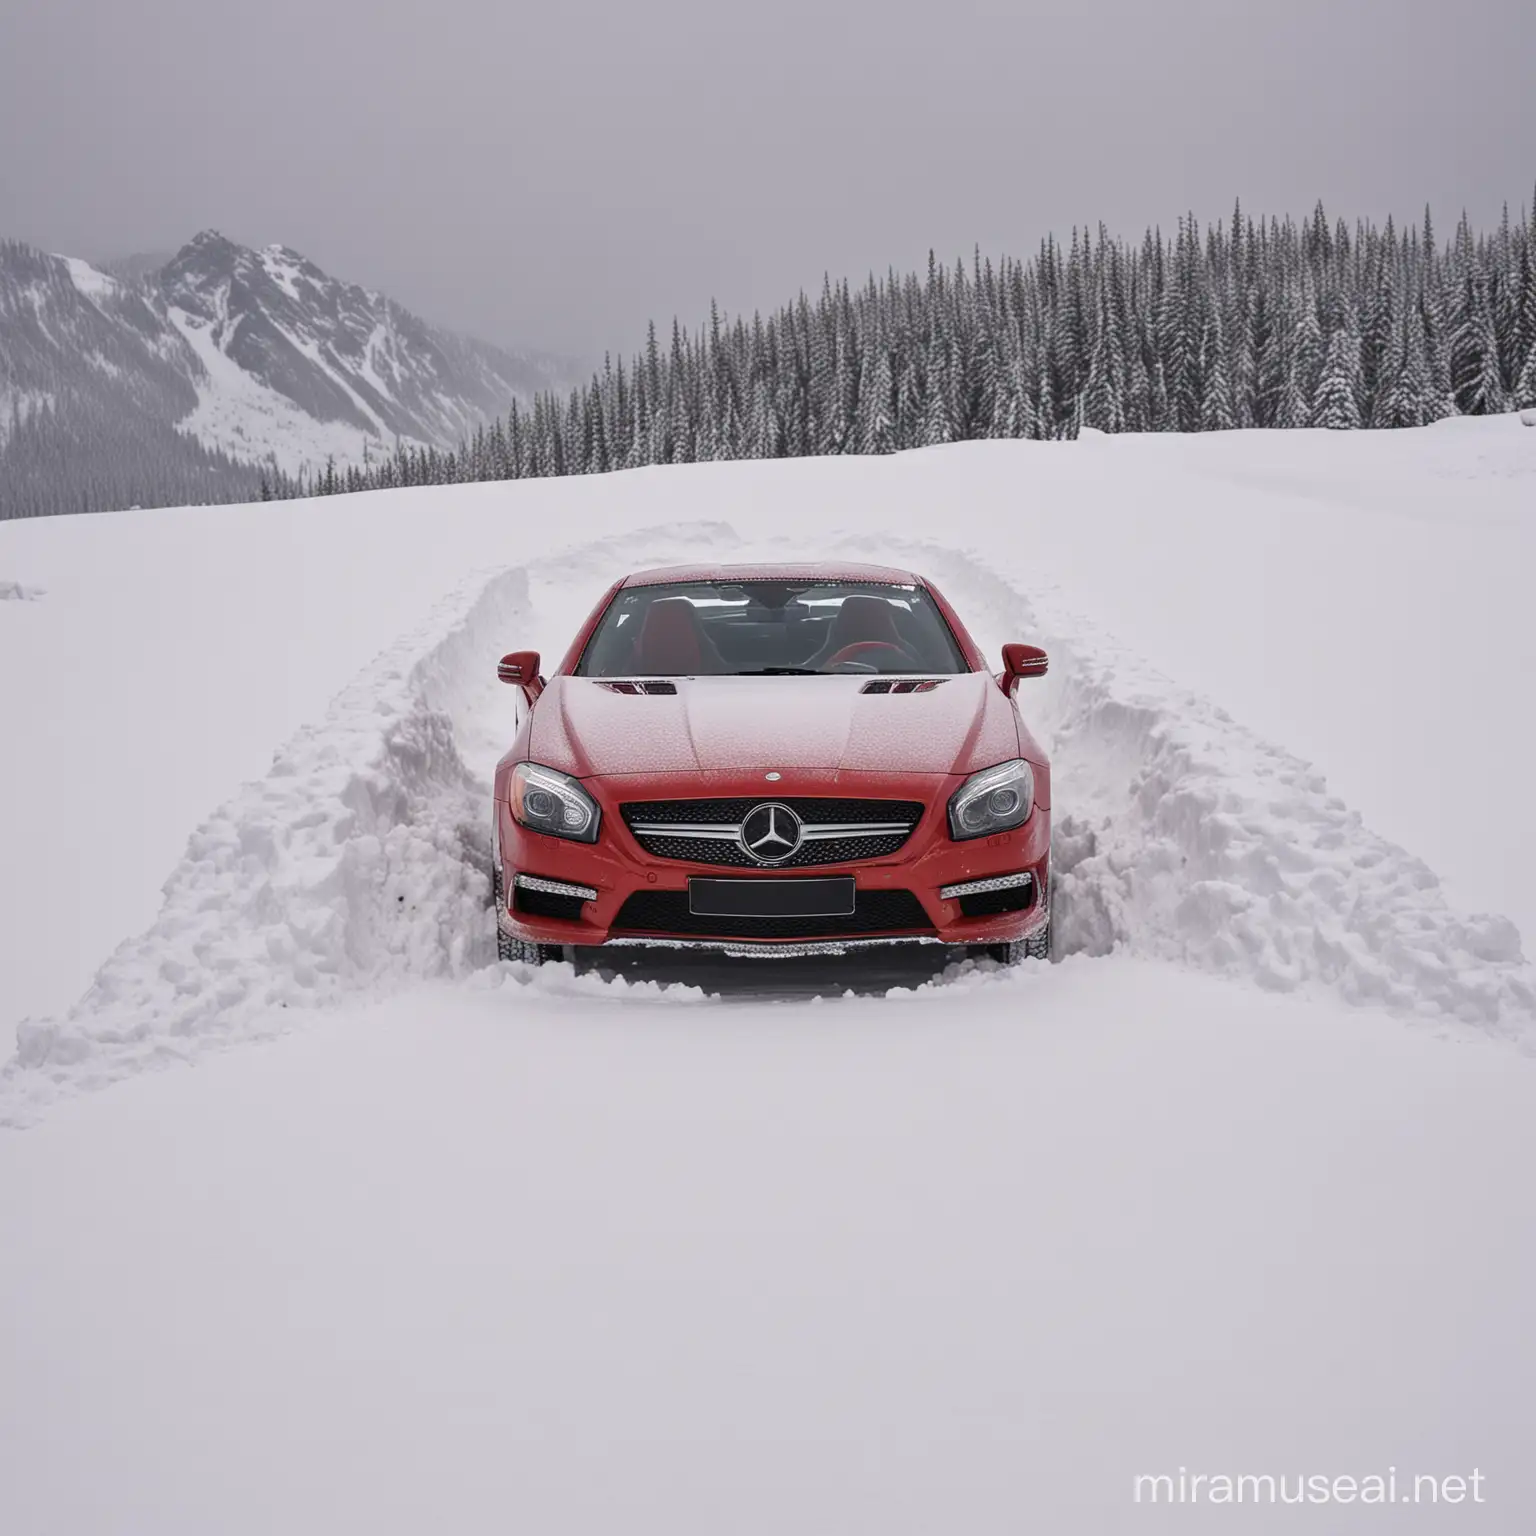 2014 Mercedes SL400, red, Arctic Circle, half buried in snow.